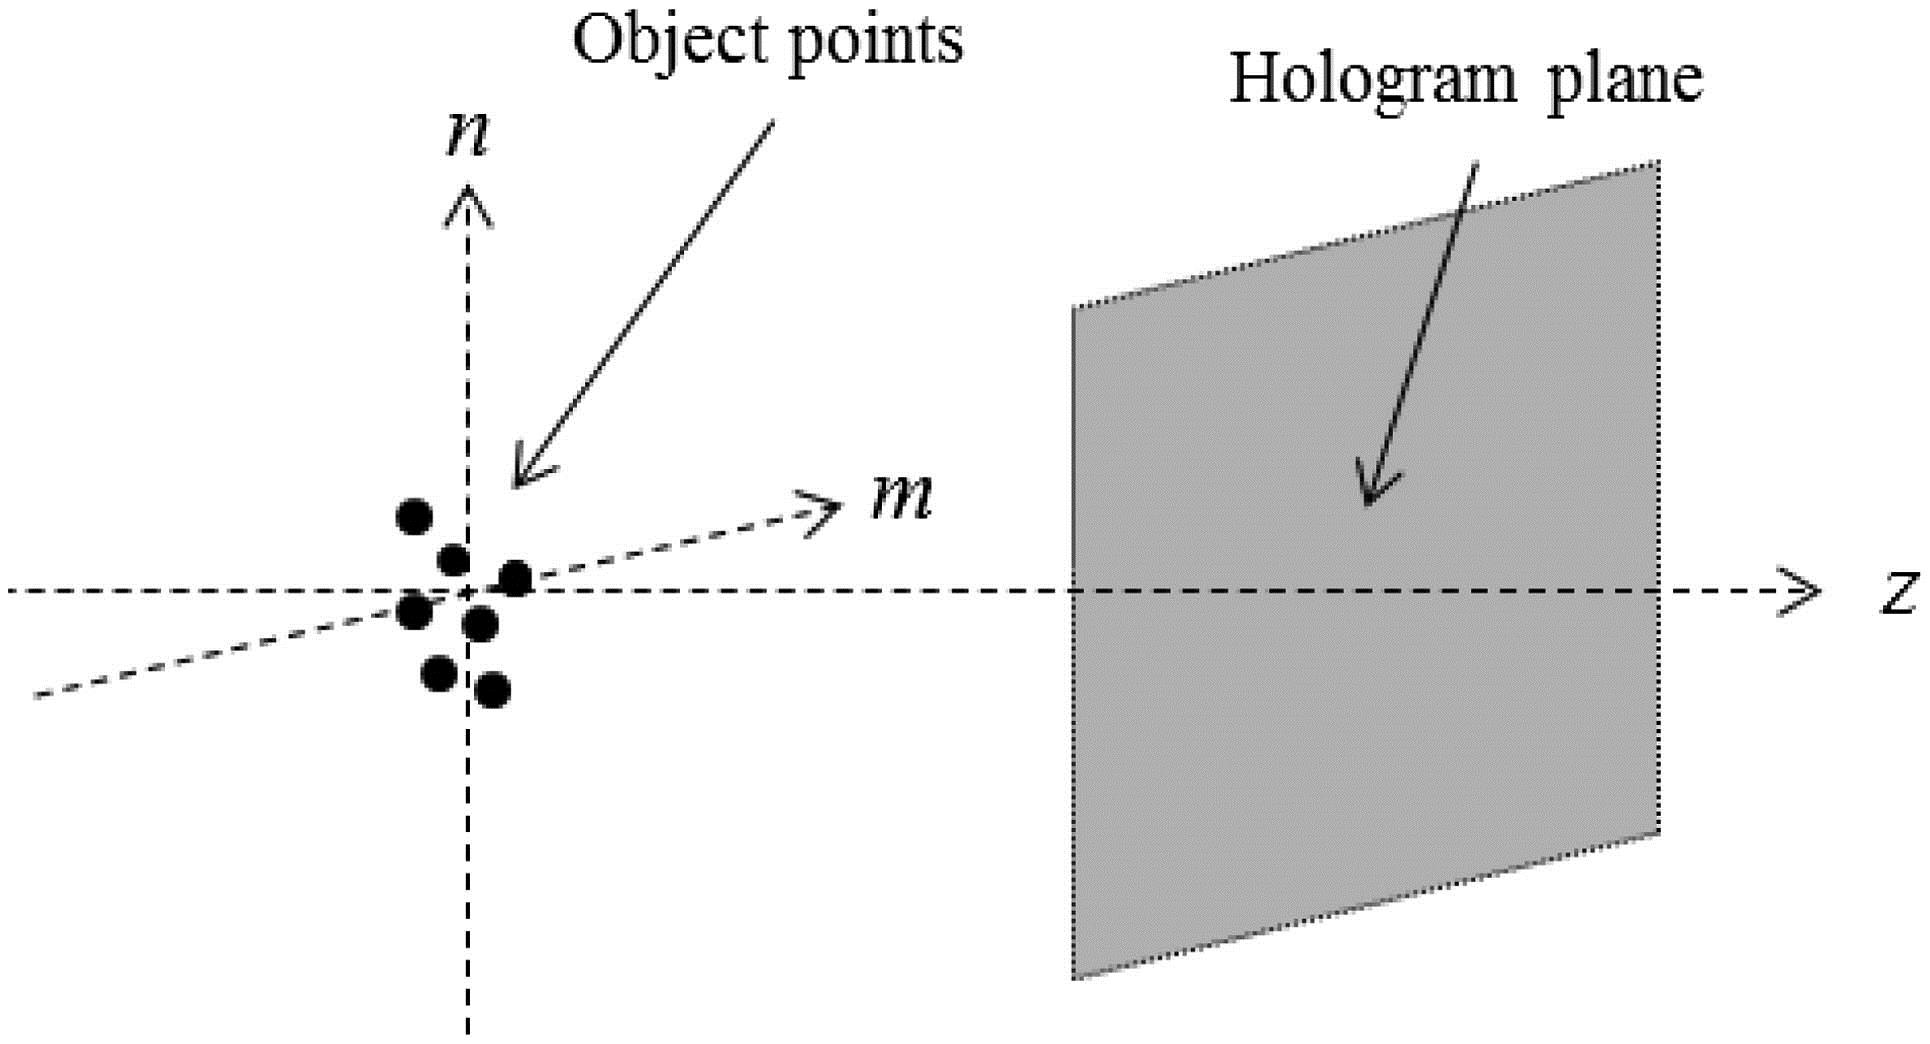 Spatial relation between object points and the hologram plane.